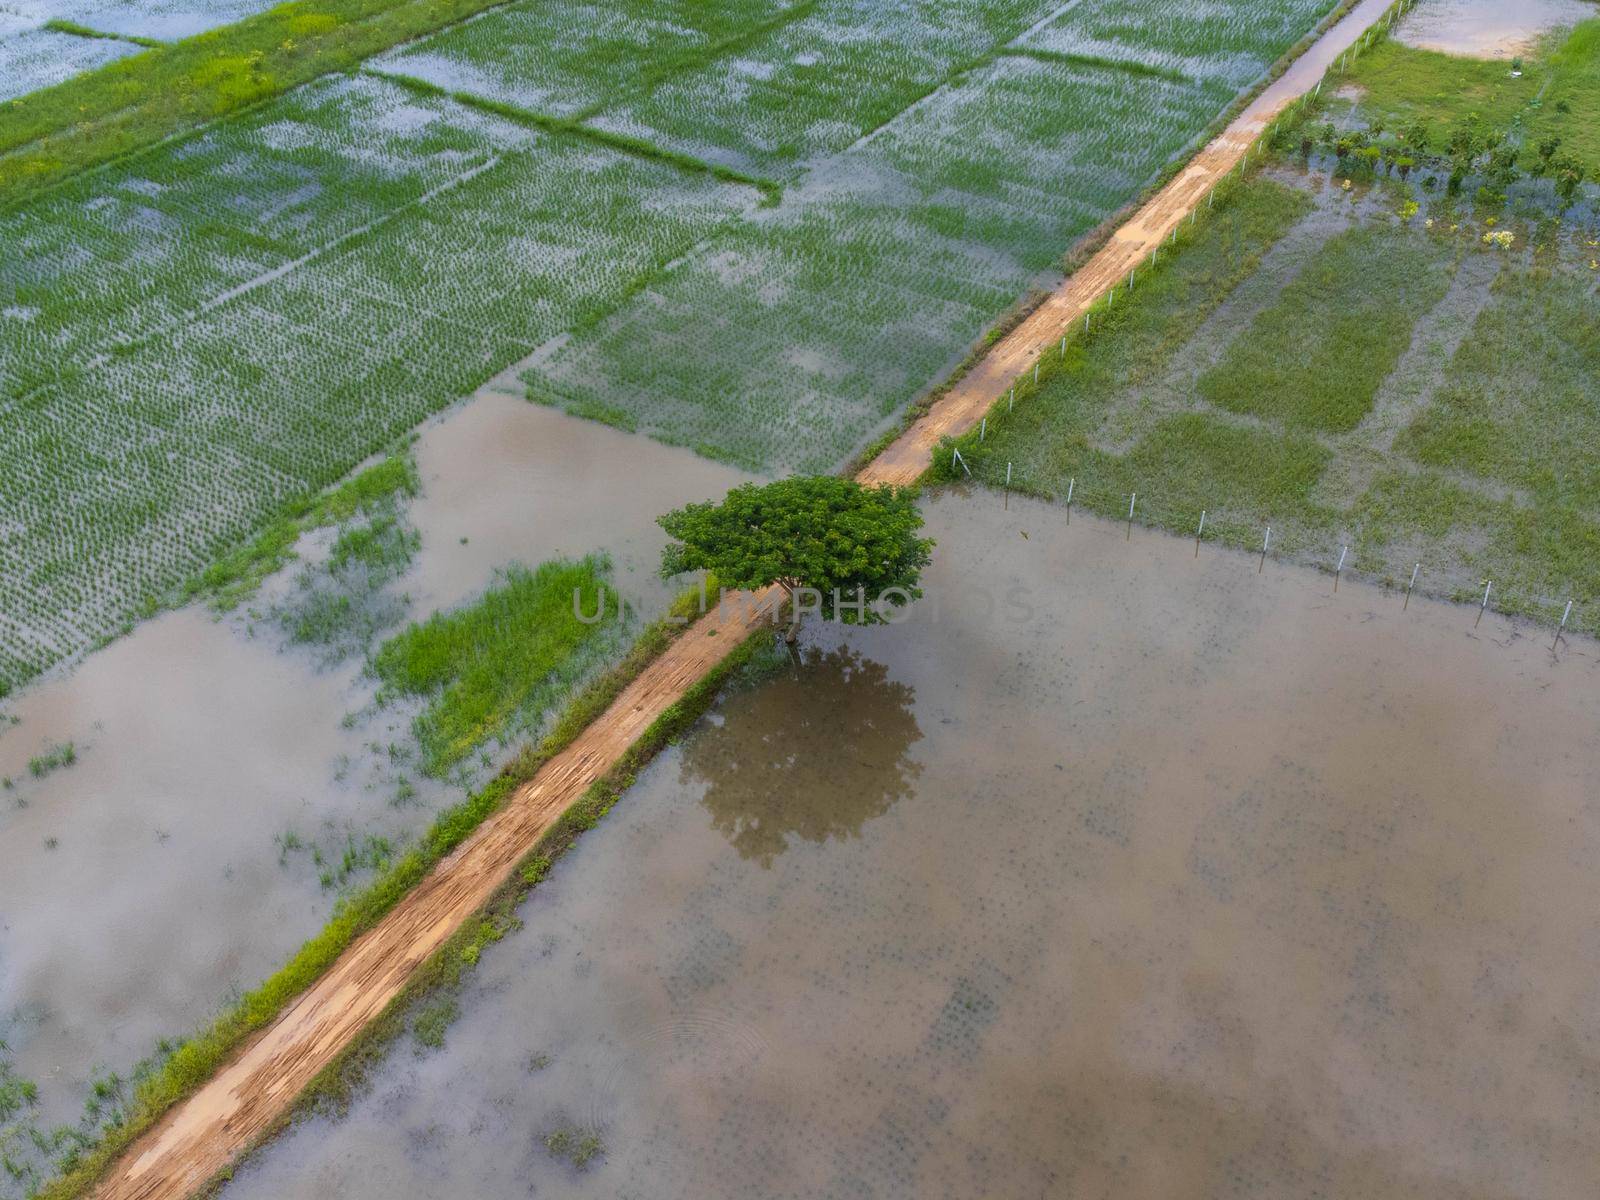 Aerial view of rice fields or agricultural areas affected by rainy season floods. Top view of a river overflowing after heavy rain and flooding of agricultural fields.